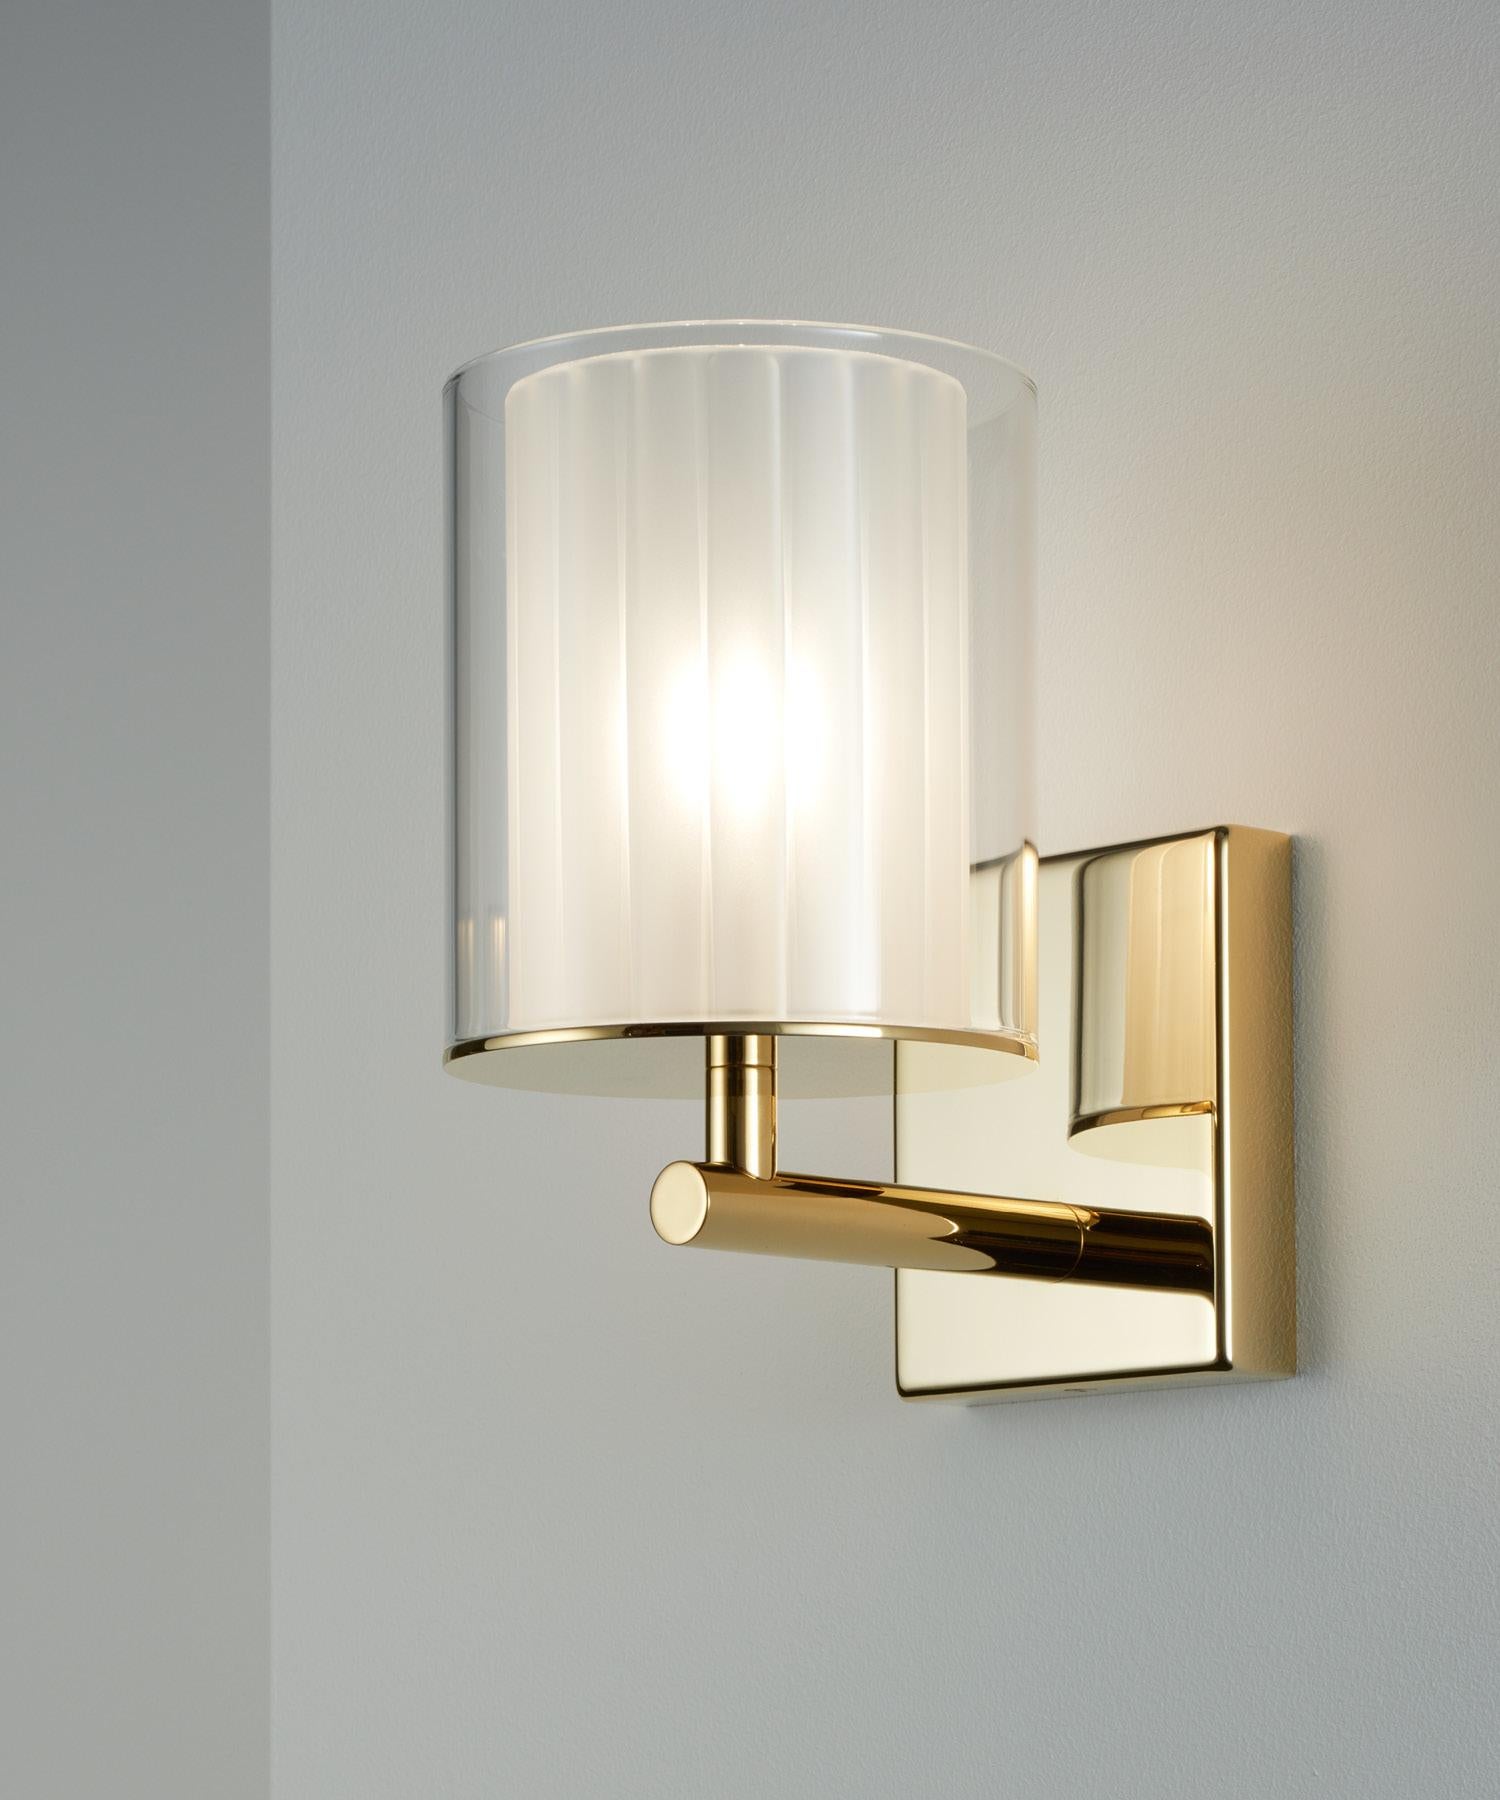 British Flute Wall Light XL in Polished Chrome with Frosted Glass Diffuser, UL Listed For Sale